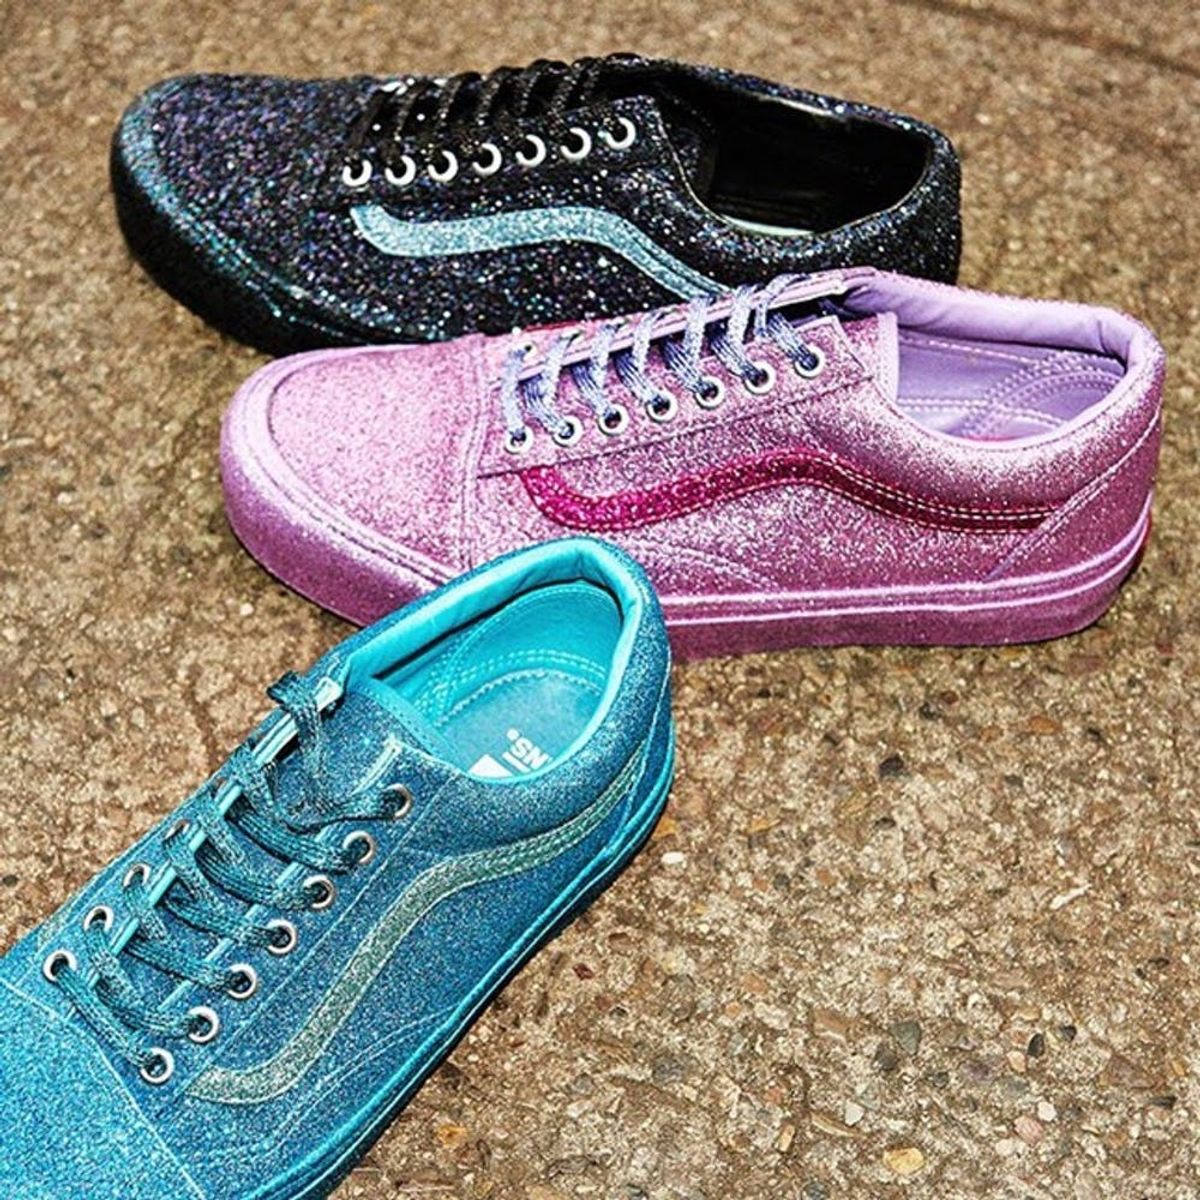 These Opening Ceremony x Vans Glitter Shoes Are Here Just in Time for the Holidays